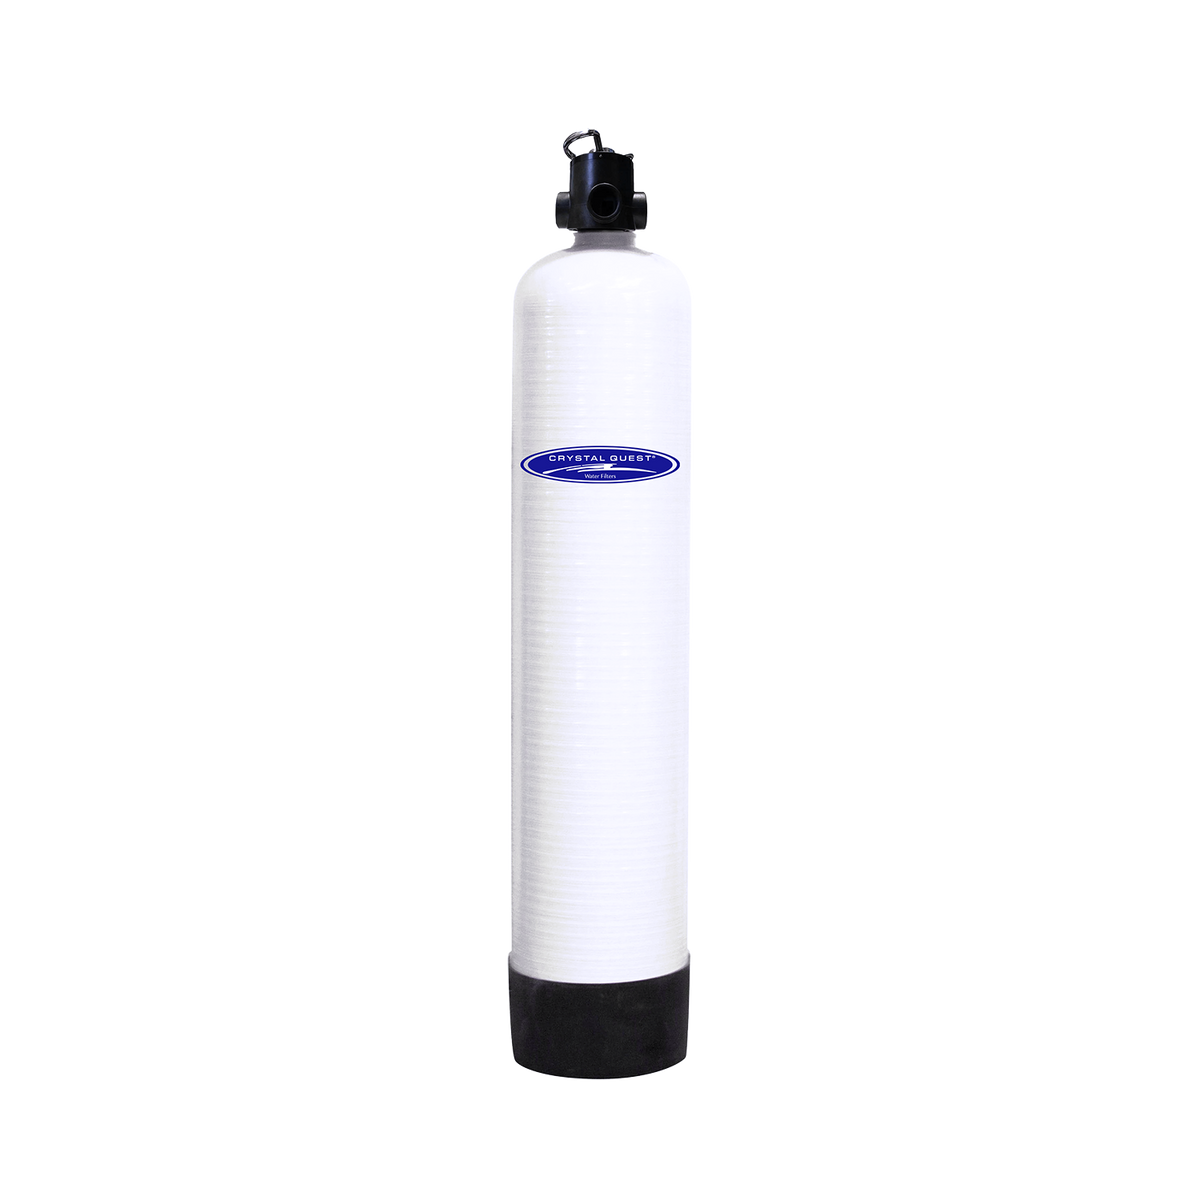 15 GPM / Aluminum Oxide / Manual (Downflow w/ Backwash) Fluoride Removal Water Filtration System - Commercial - Crystal Quest